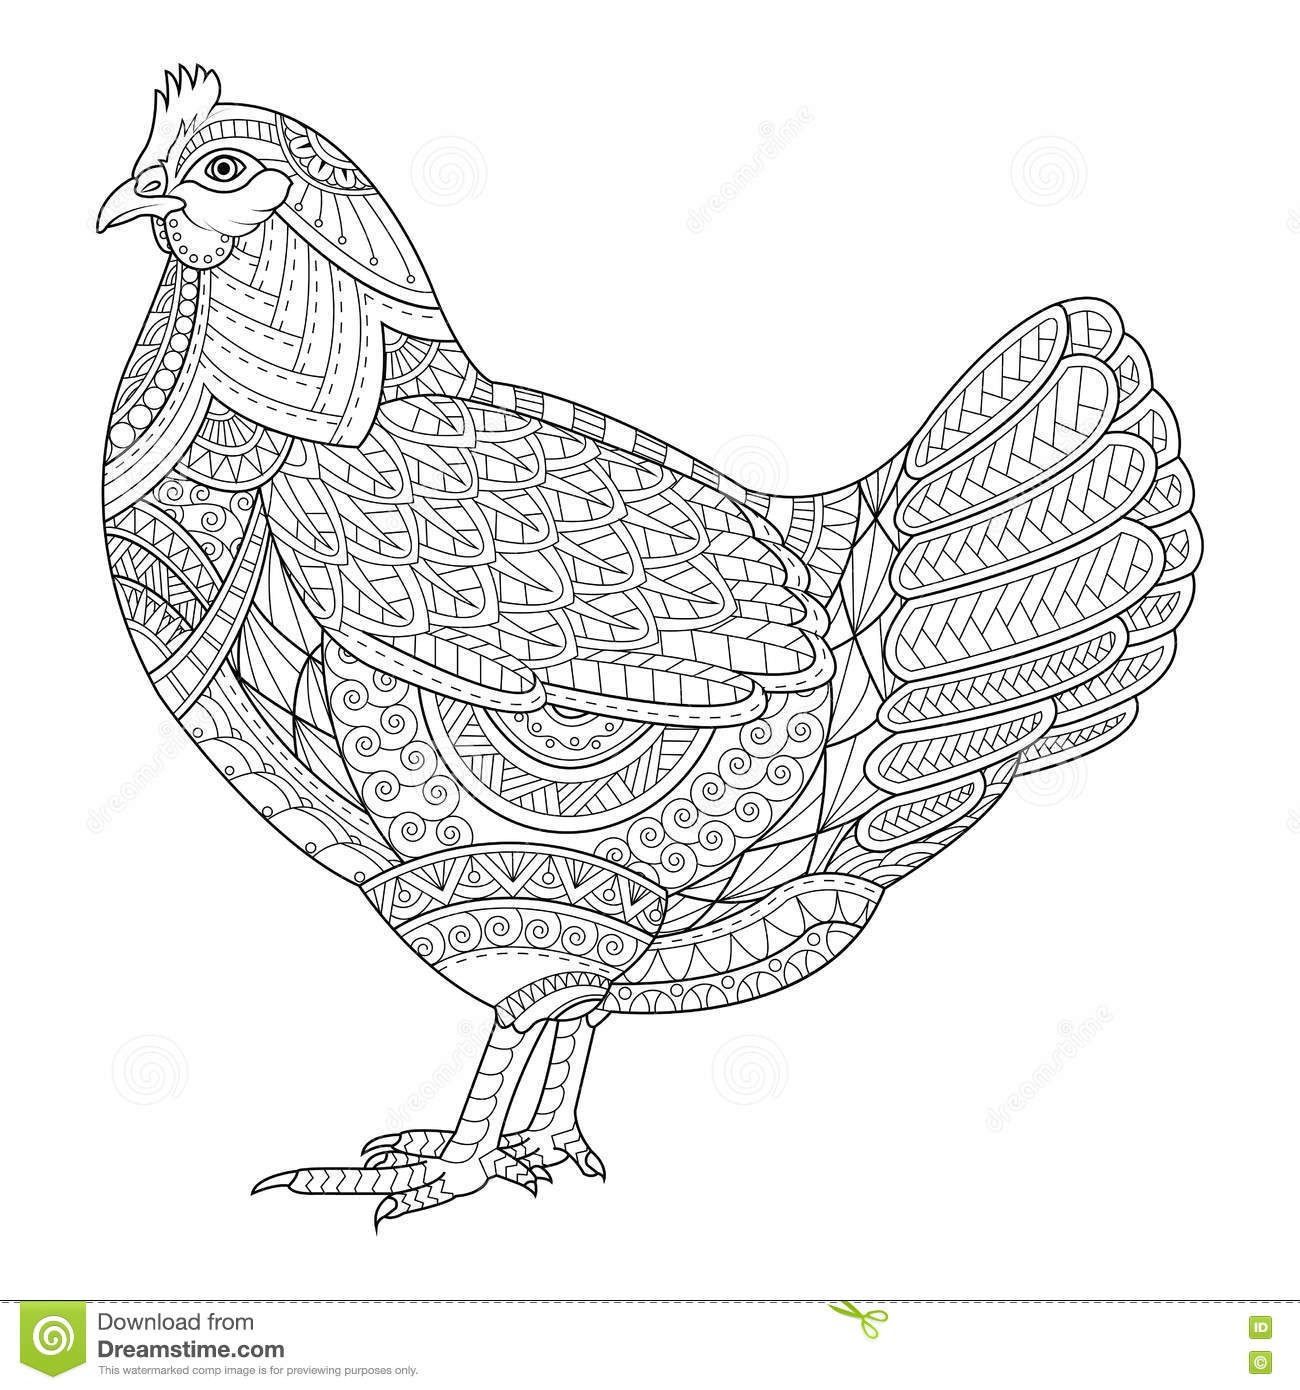 Chicken Coloring Pages For Adults
 Chicken Zentangle Stylized For Coloring Book For Adult